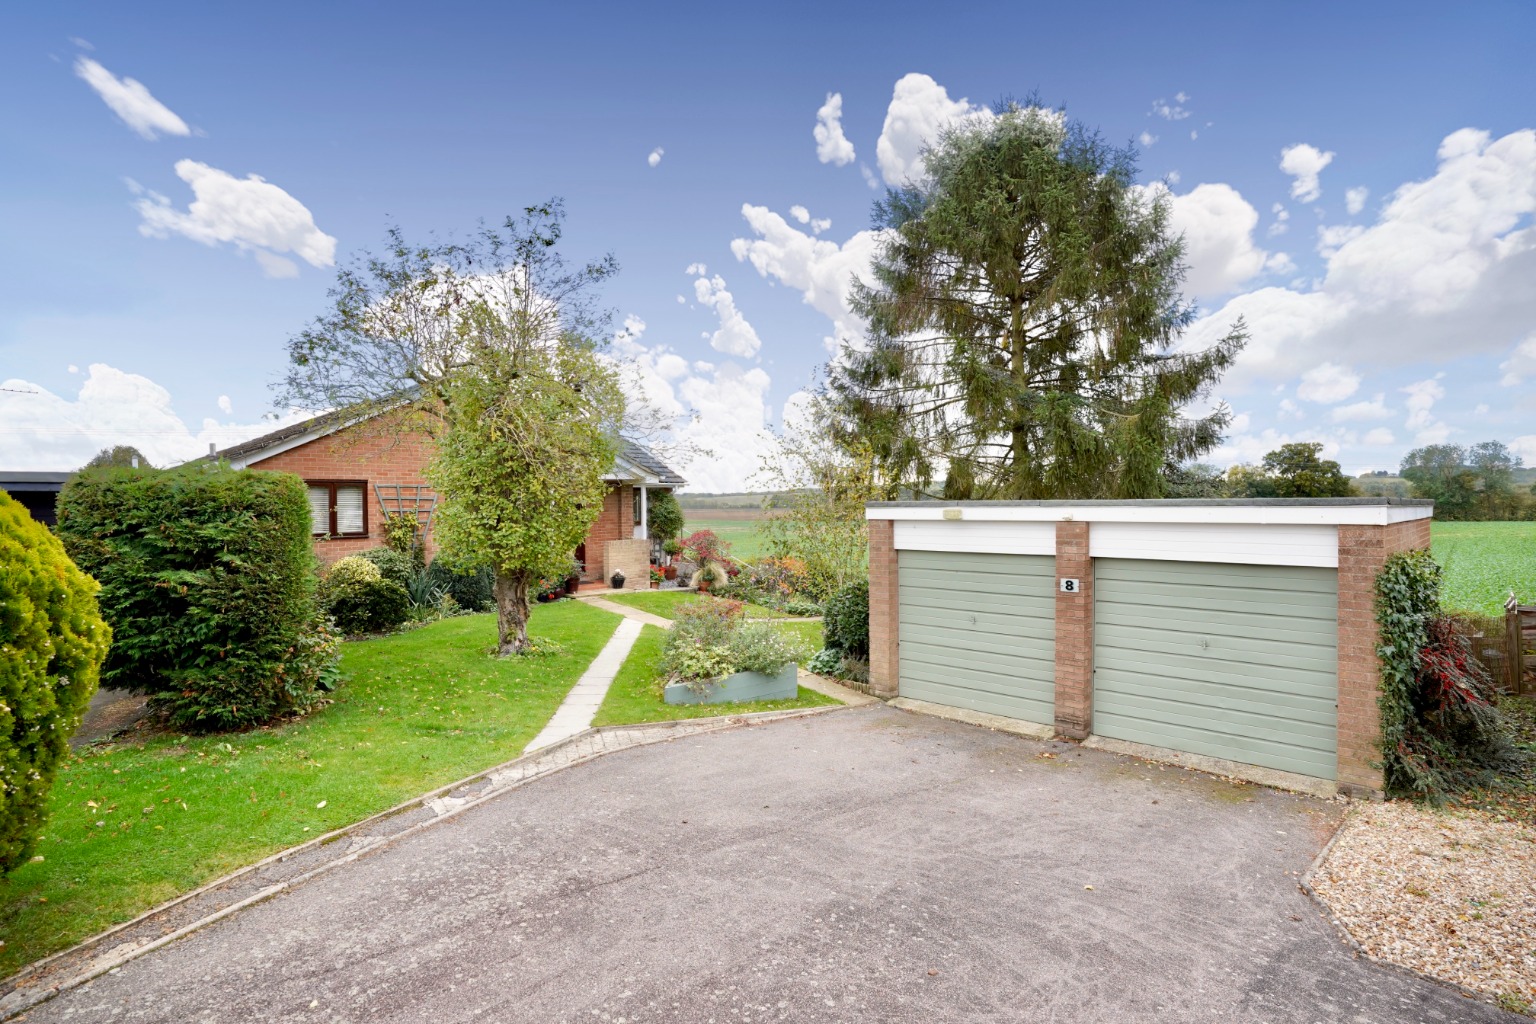 4 bed detached bungalow for sale in Parsons Drive, Huntingdon - Property Image 1